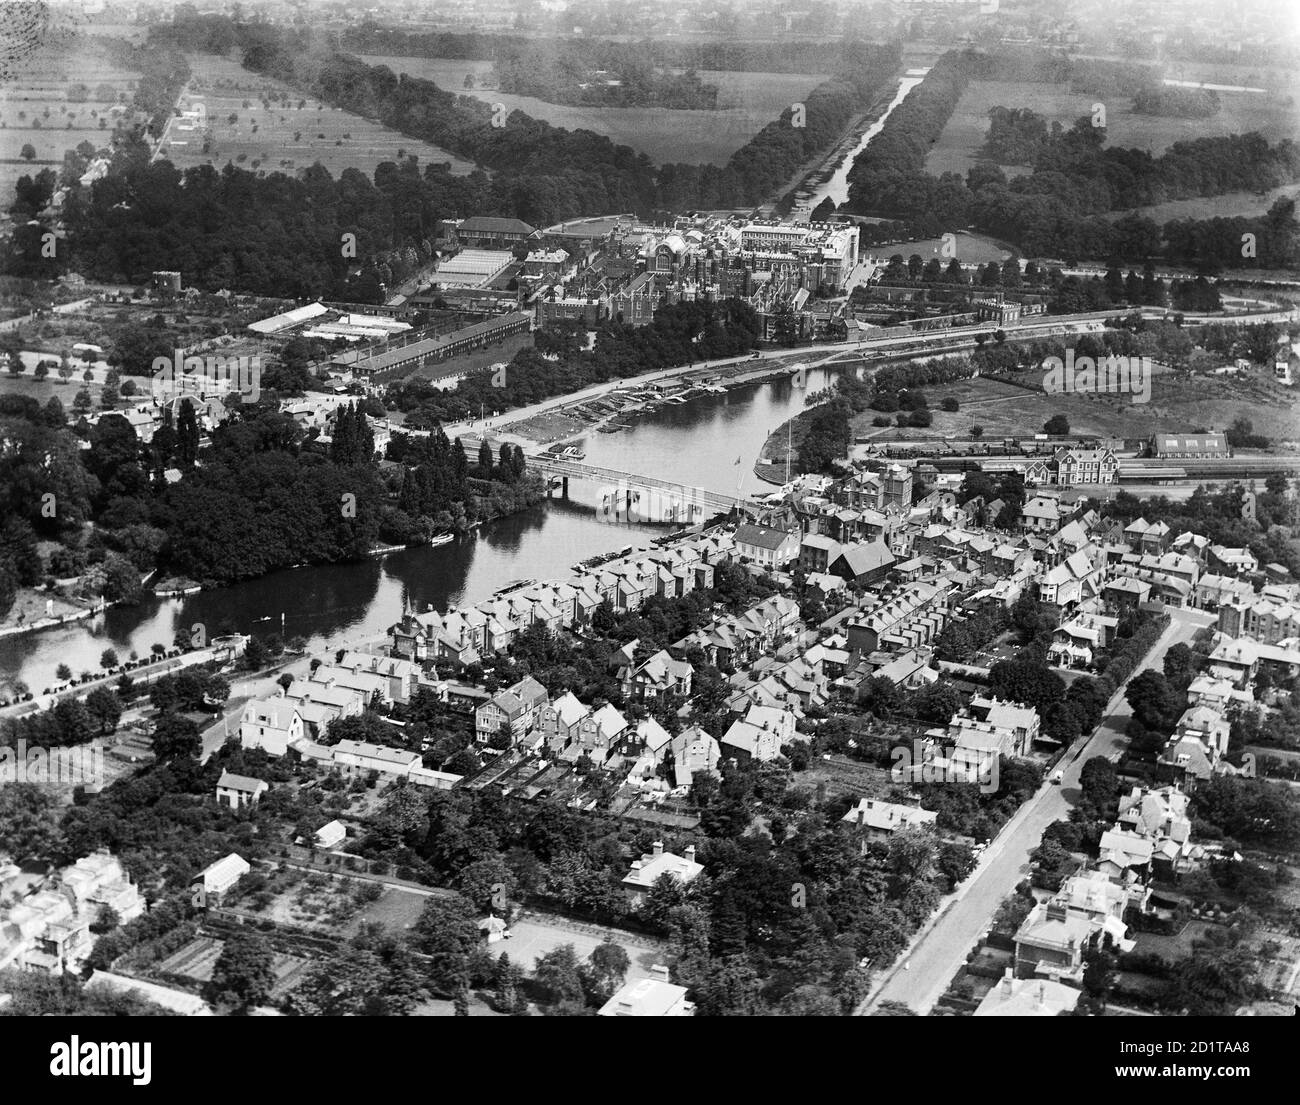 HAMPTON COURT, Richmond-upon-Thames, London. Aerial view of Hampton Court Palace, the gardens and the River Thames. Photographed in 1920. Aerofilms Collection (see Links). Stock Photo